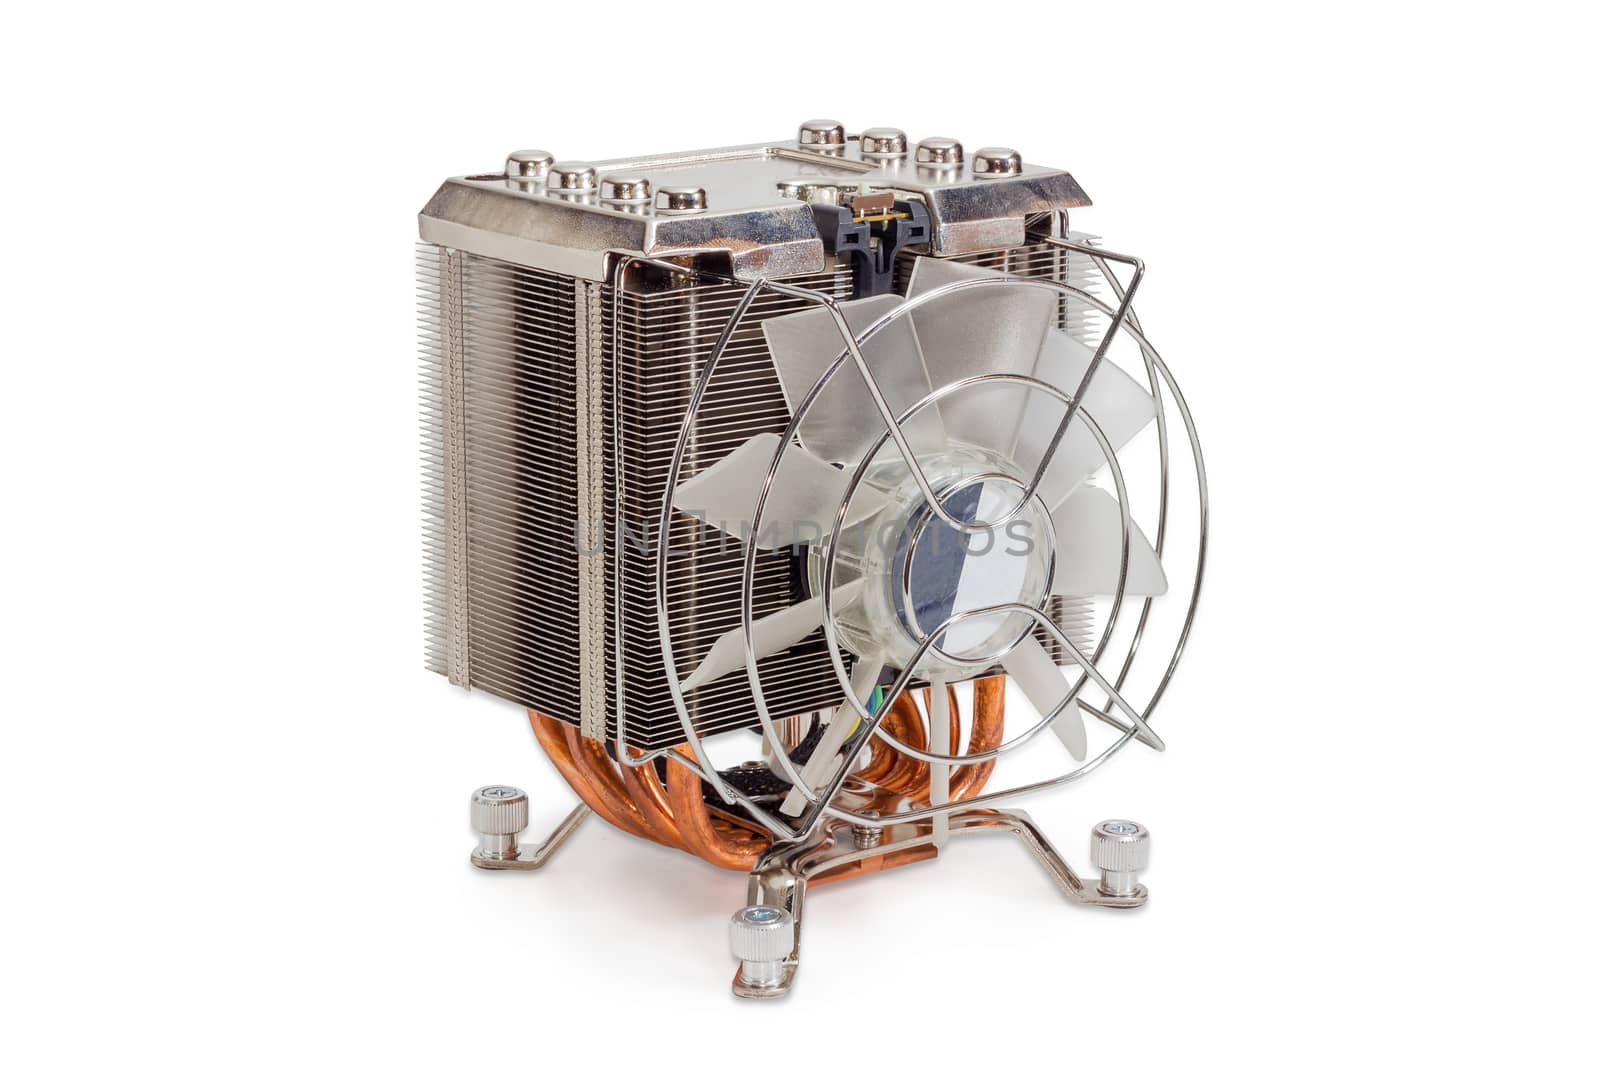 Active CPU cooler with large finned heatsink, fan, copper heat pipes and thermal pad on a light background
